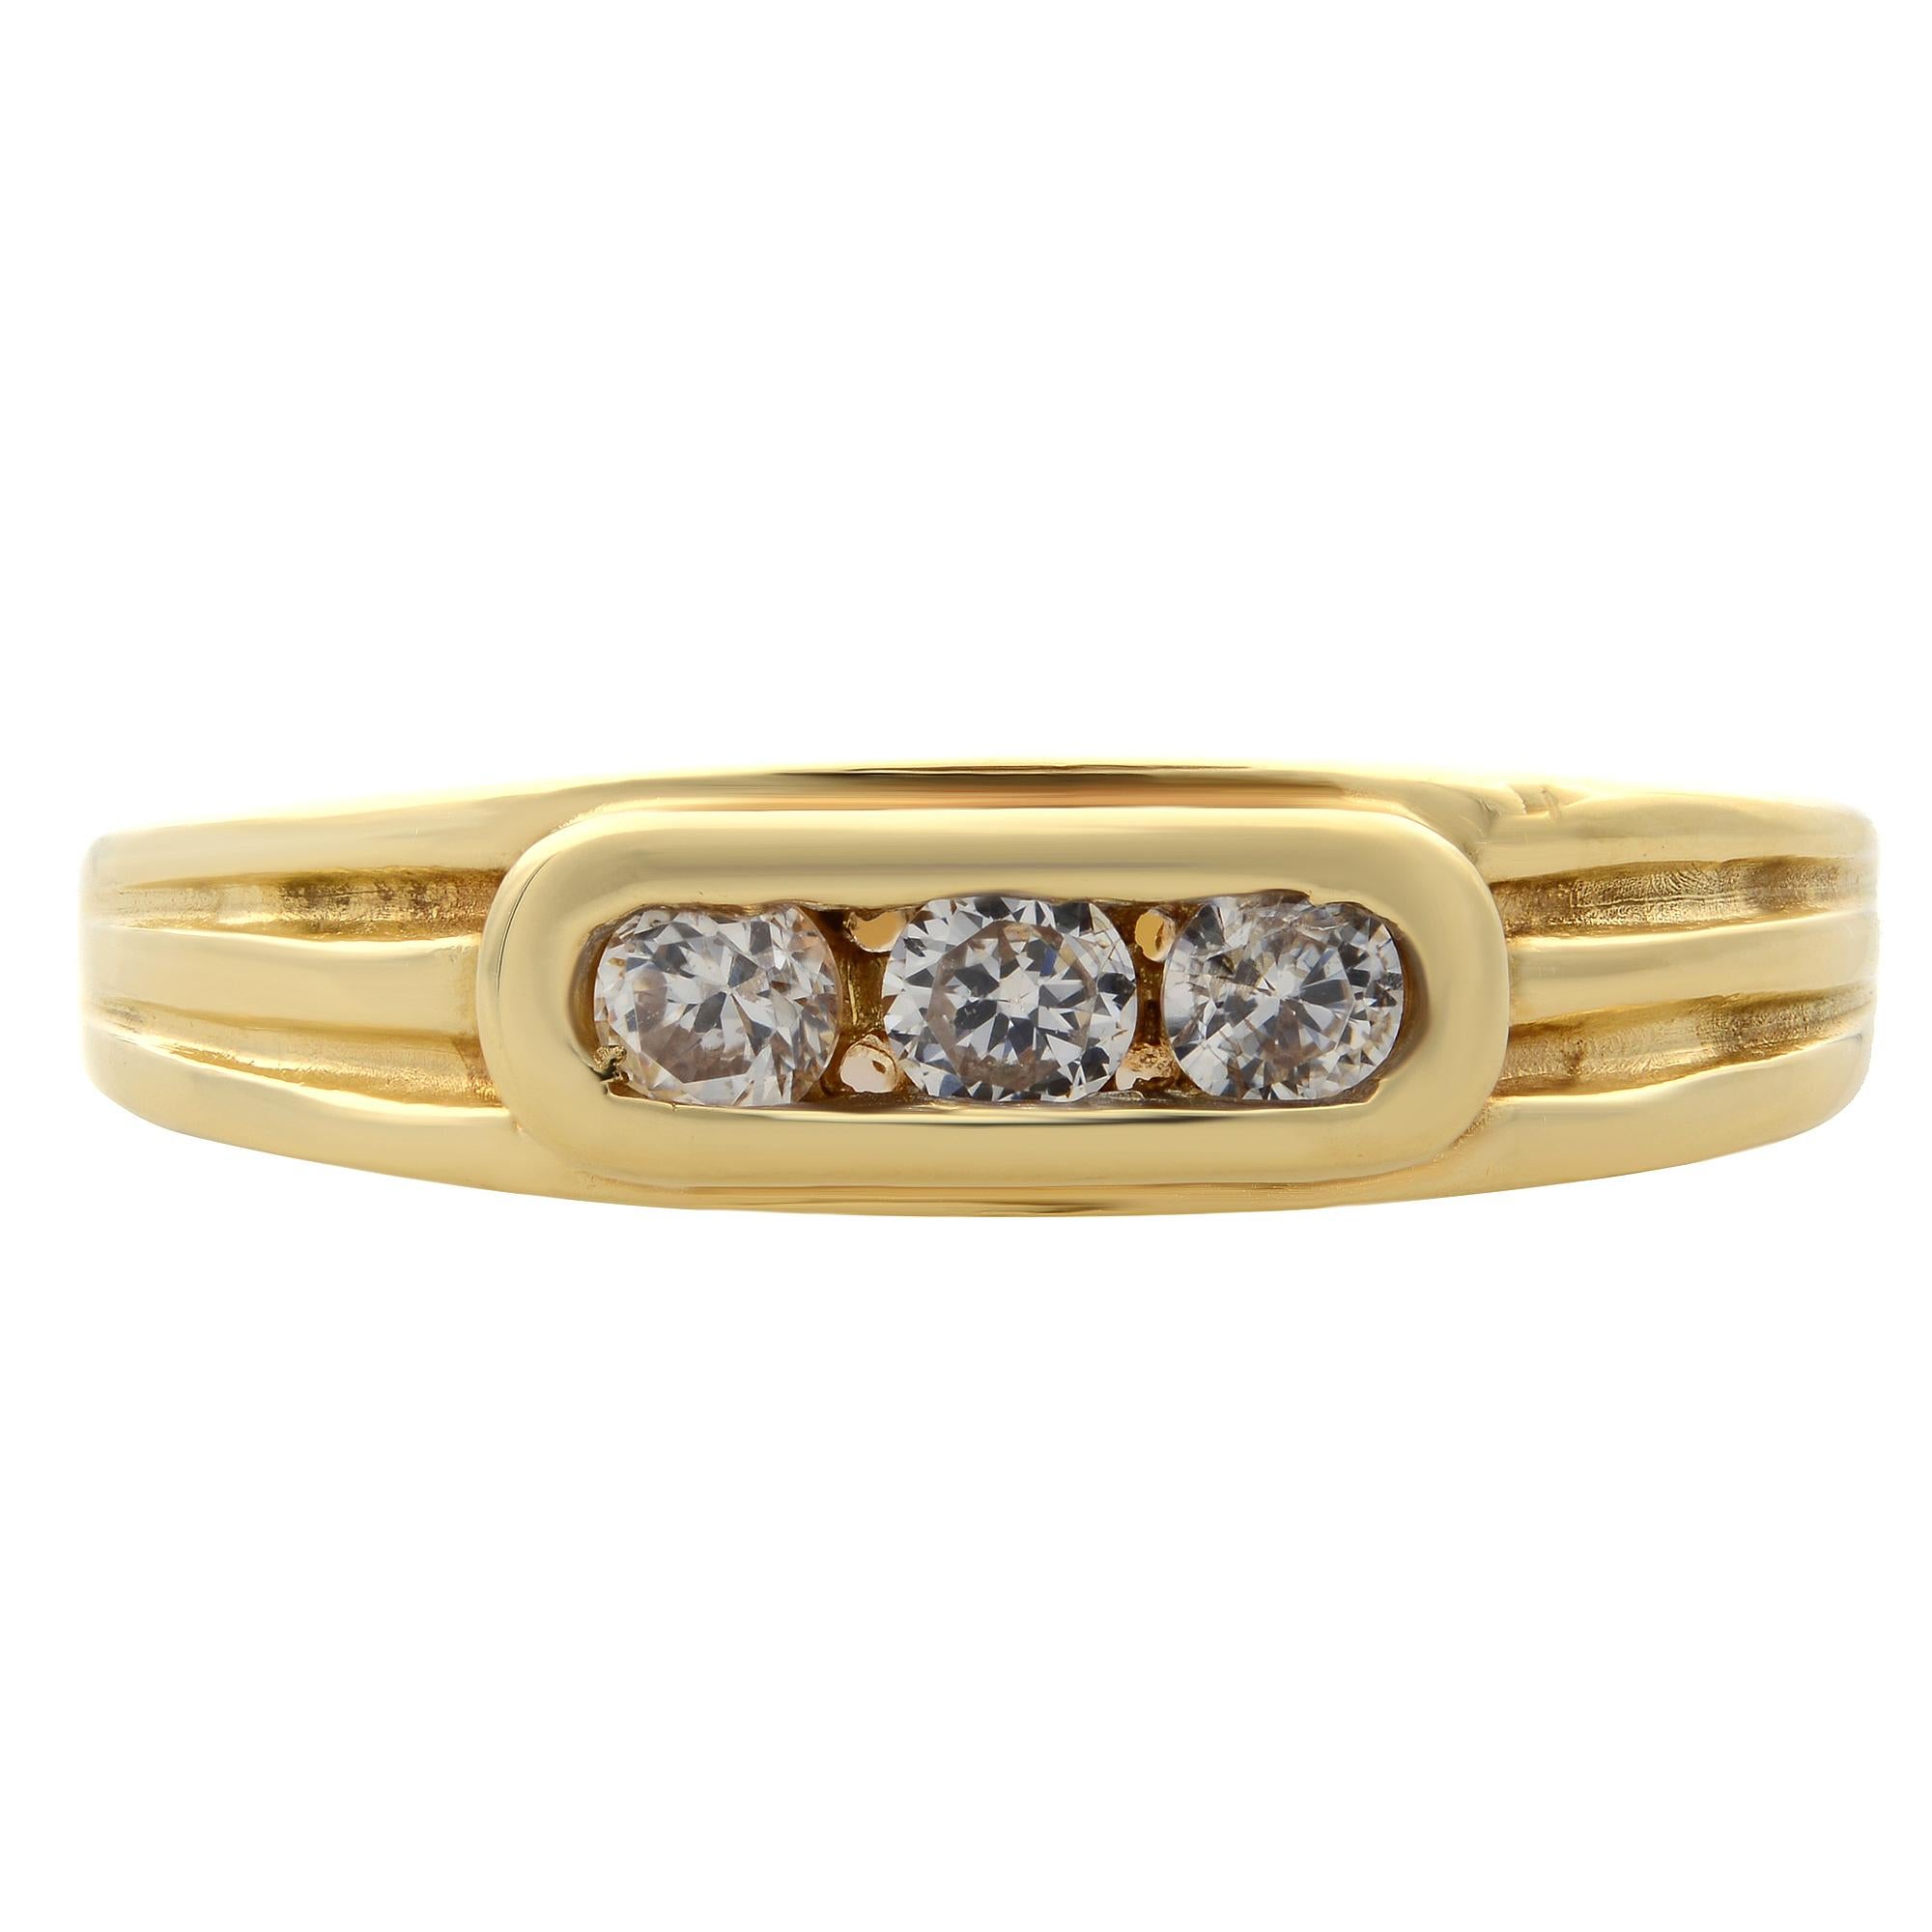 Simple and classic, this channel set diamond band ring is crafted in 14k yellow gold. It features channel set 3 round brilliant cut diamonds weighing 0.25 carat. Diamond color G-H and SI clarity. Ring width: 5.15mm. Ring size: 9.75. Total weight: